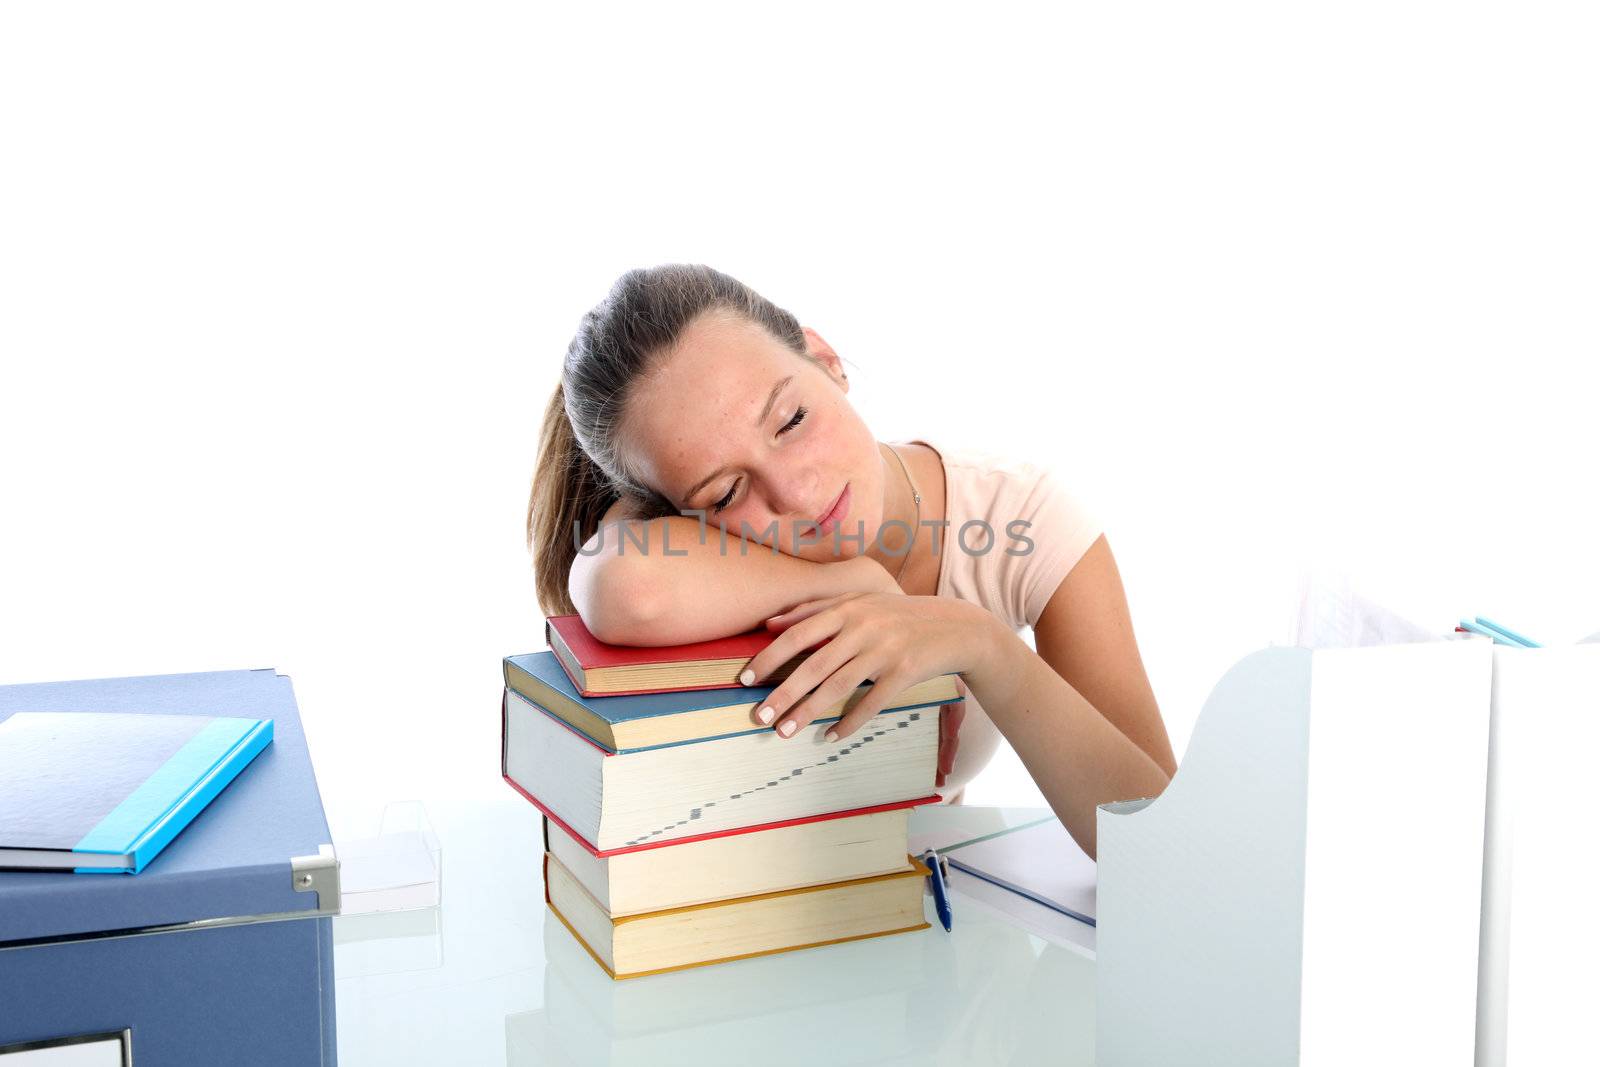 Exhausted student sleeping on books  by Farina6000